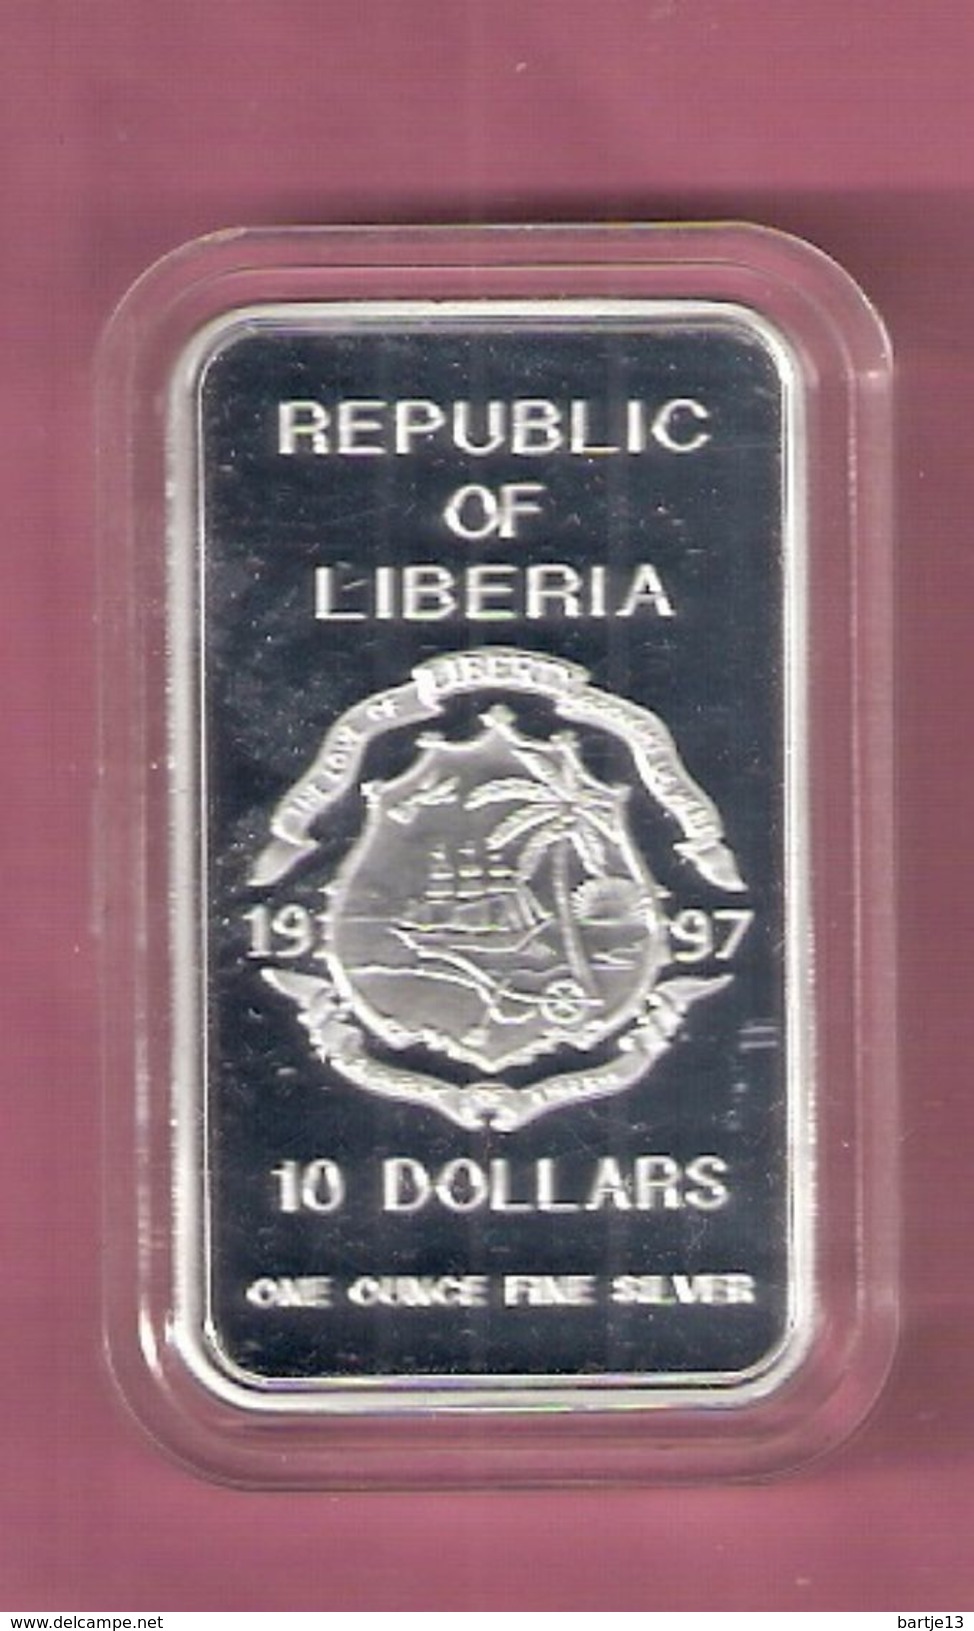 LIBERIA 10 DOLLARS 1997 SILVER PROOF RECTRANGLE COIN - RETURN HONG KONG TO CHINA  - SCRATCHES ONLY ON CAPSEL - Liberia